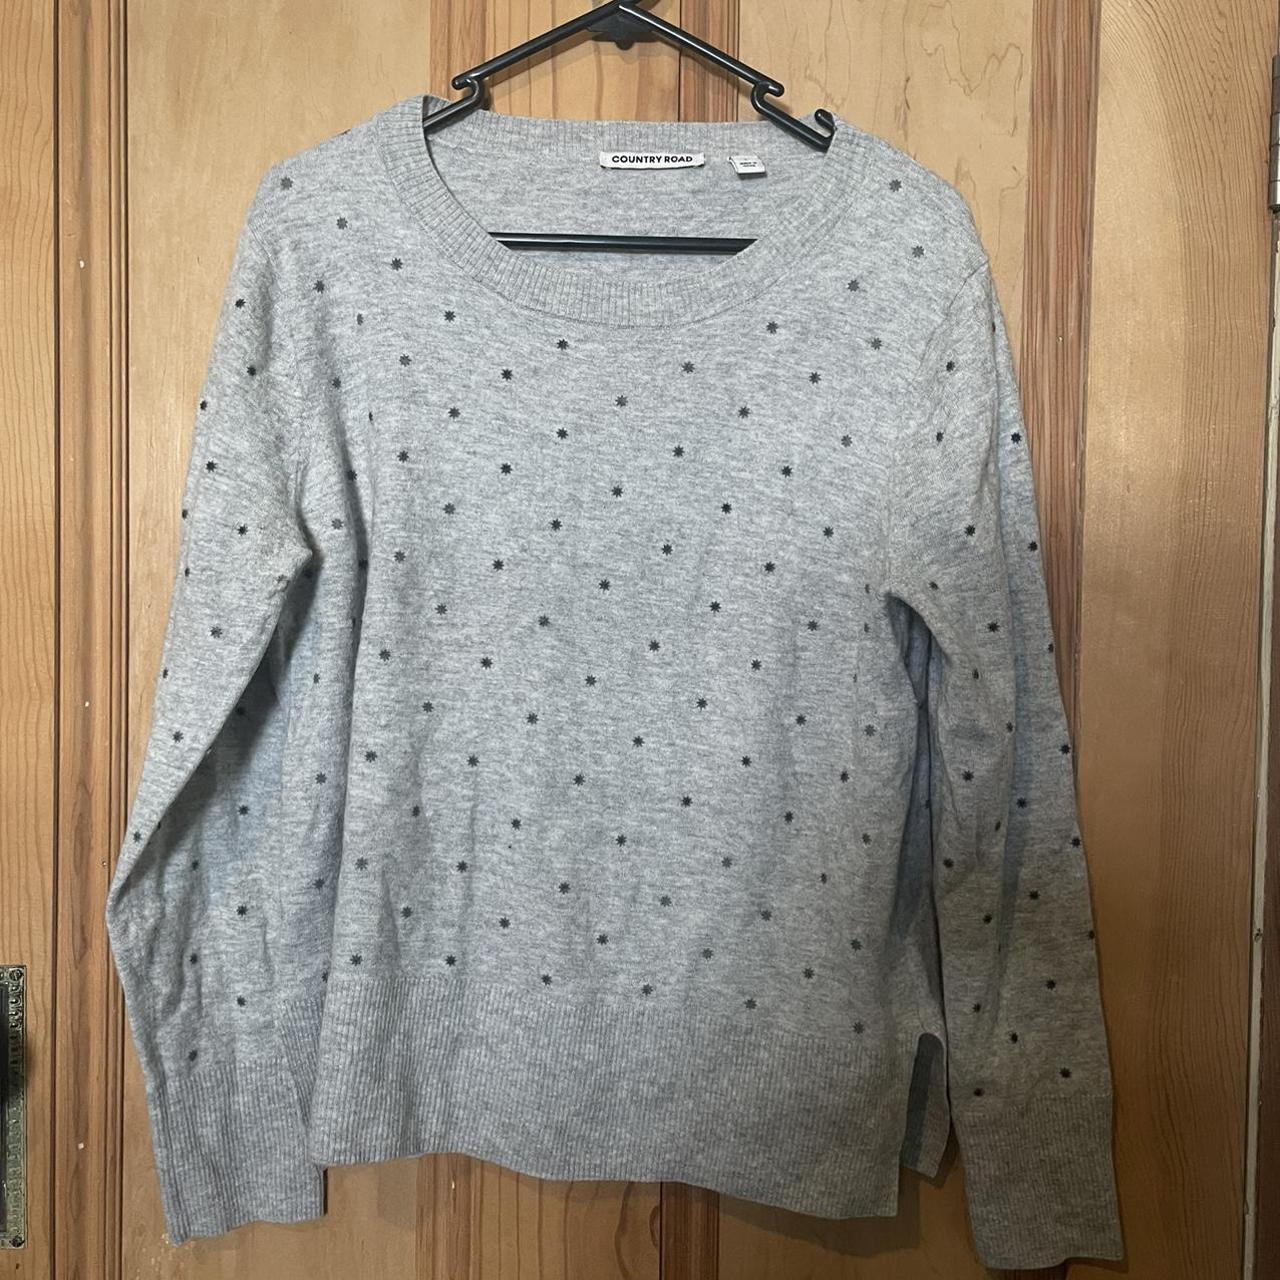 Country road jumper Great for work and... - Depop